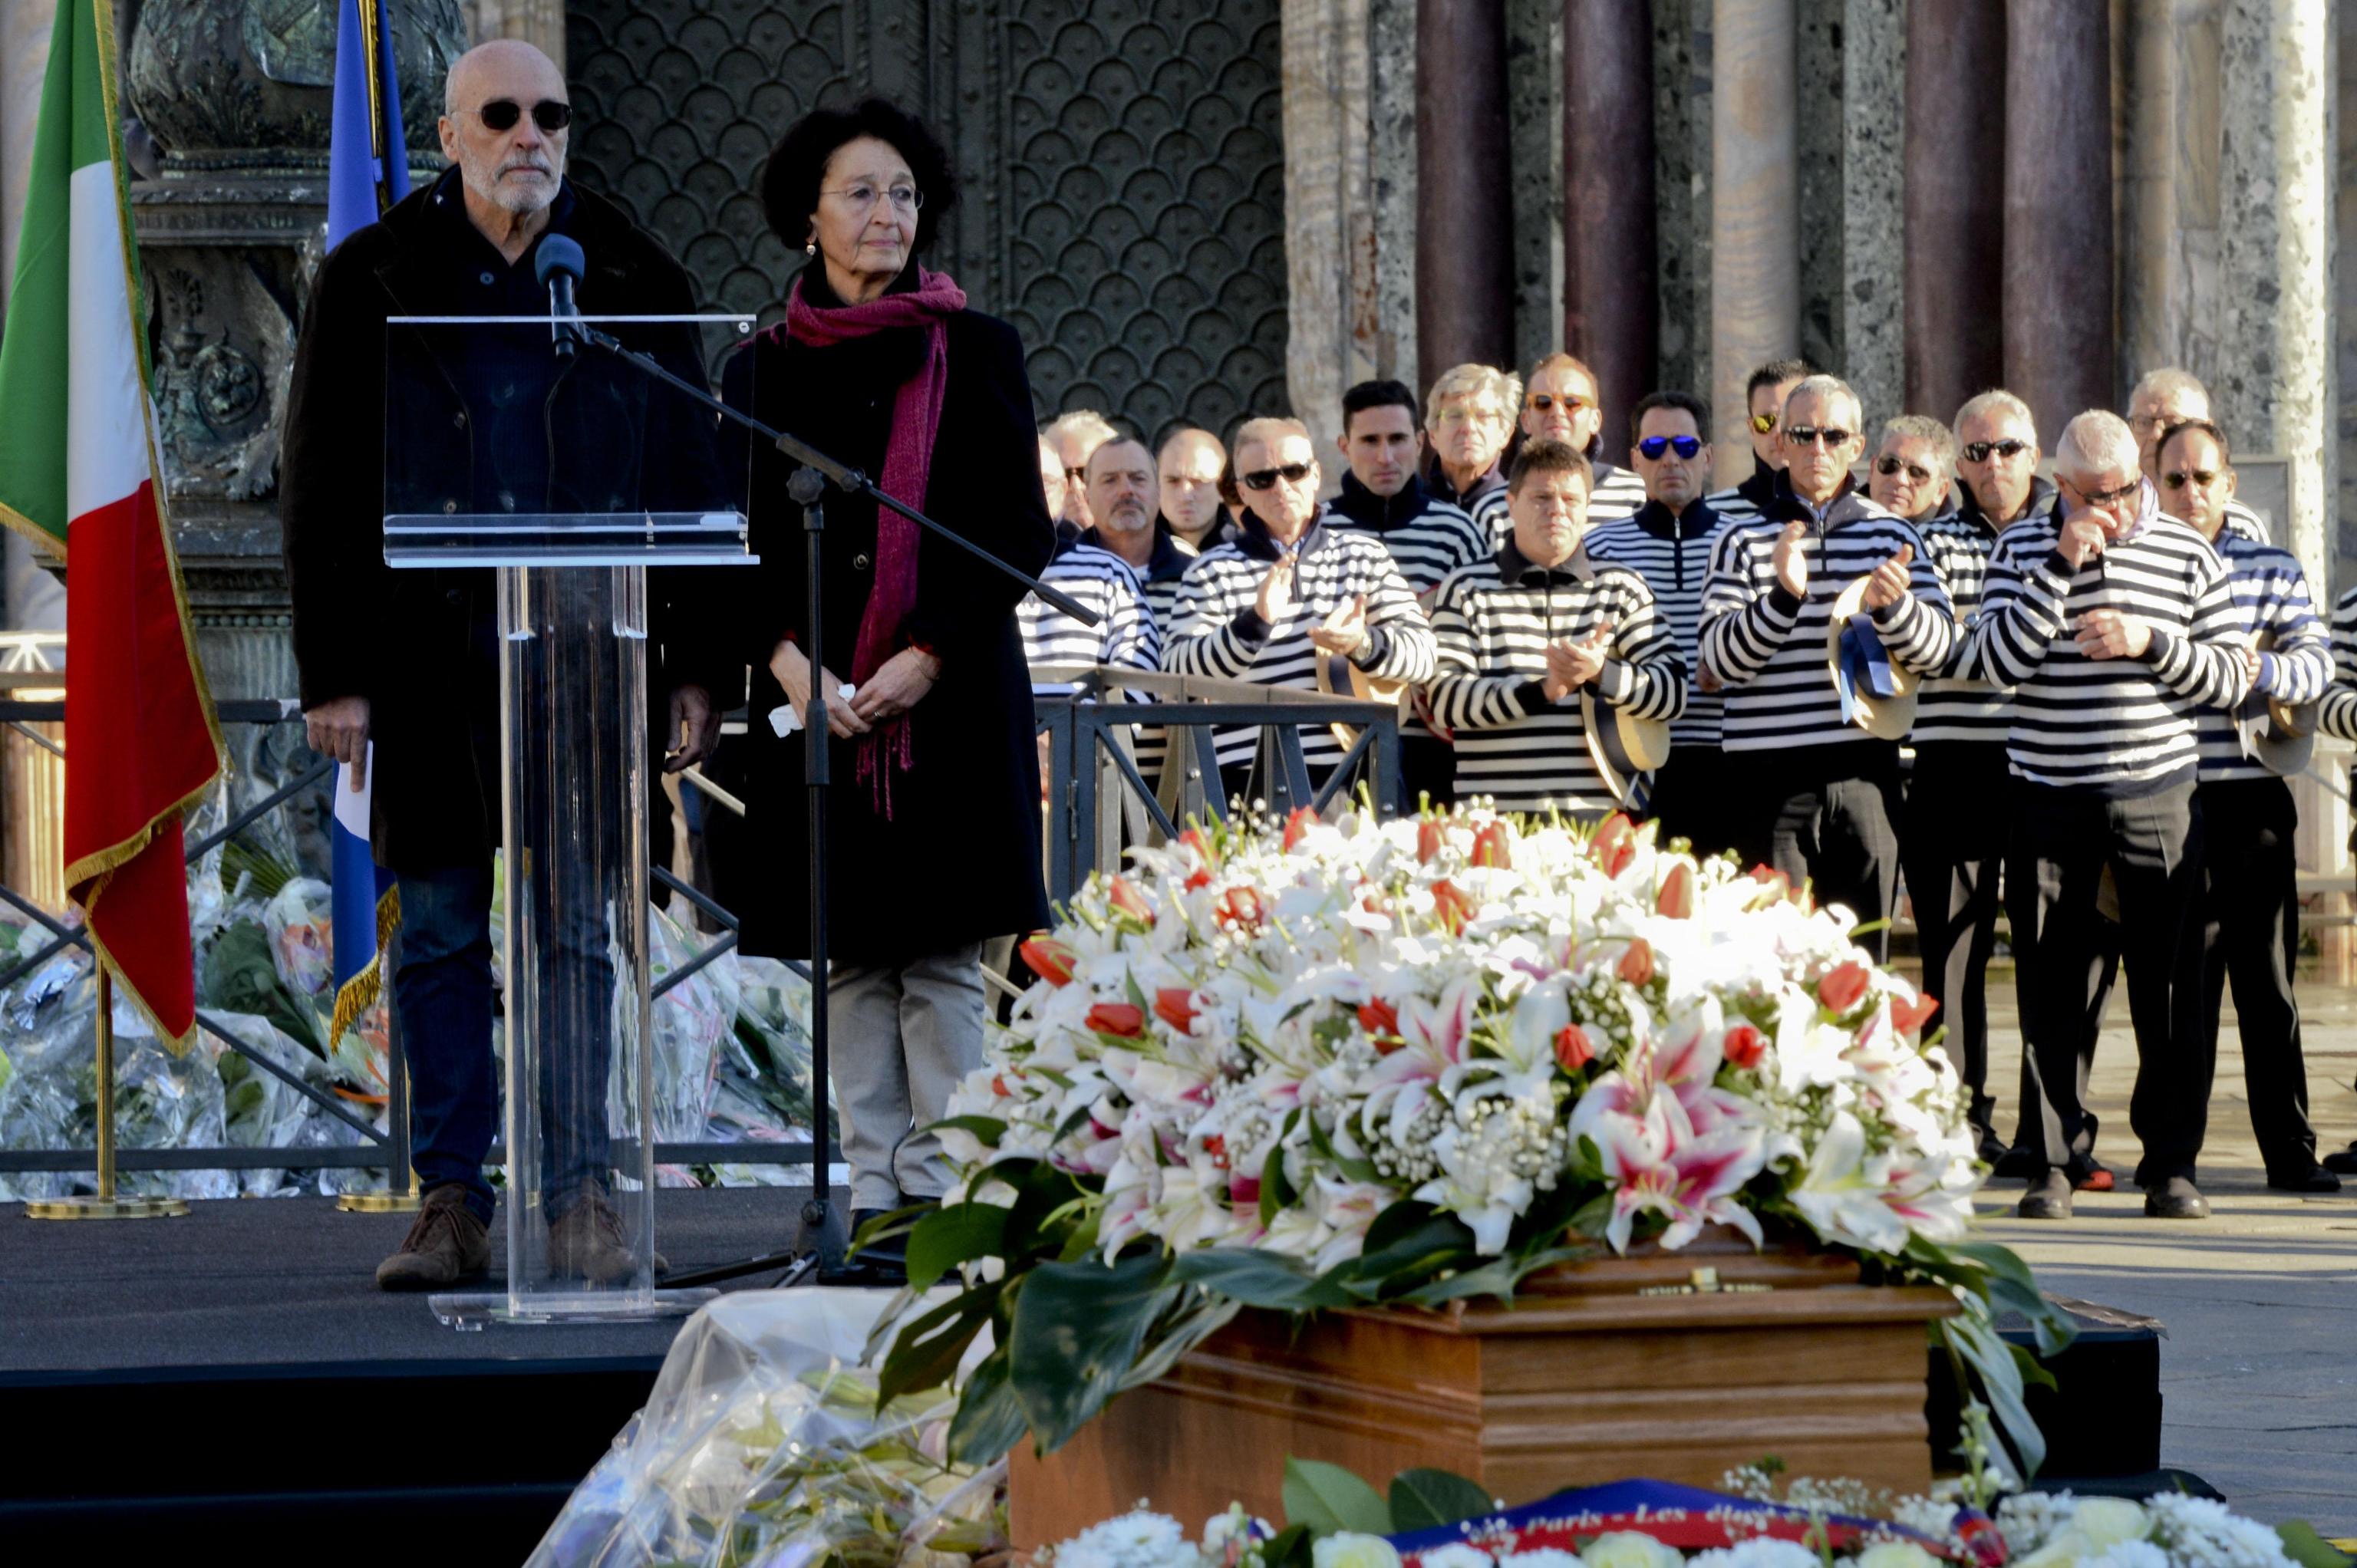 Funeral in San Marco square